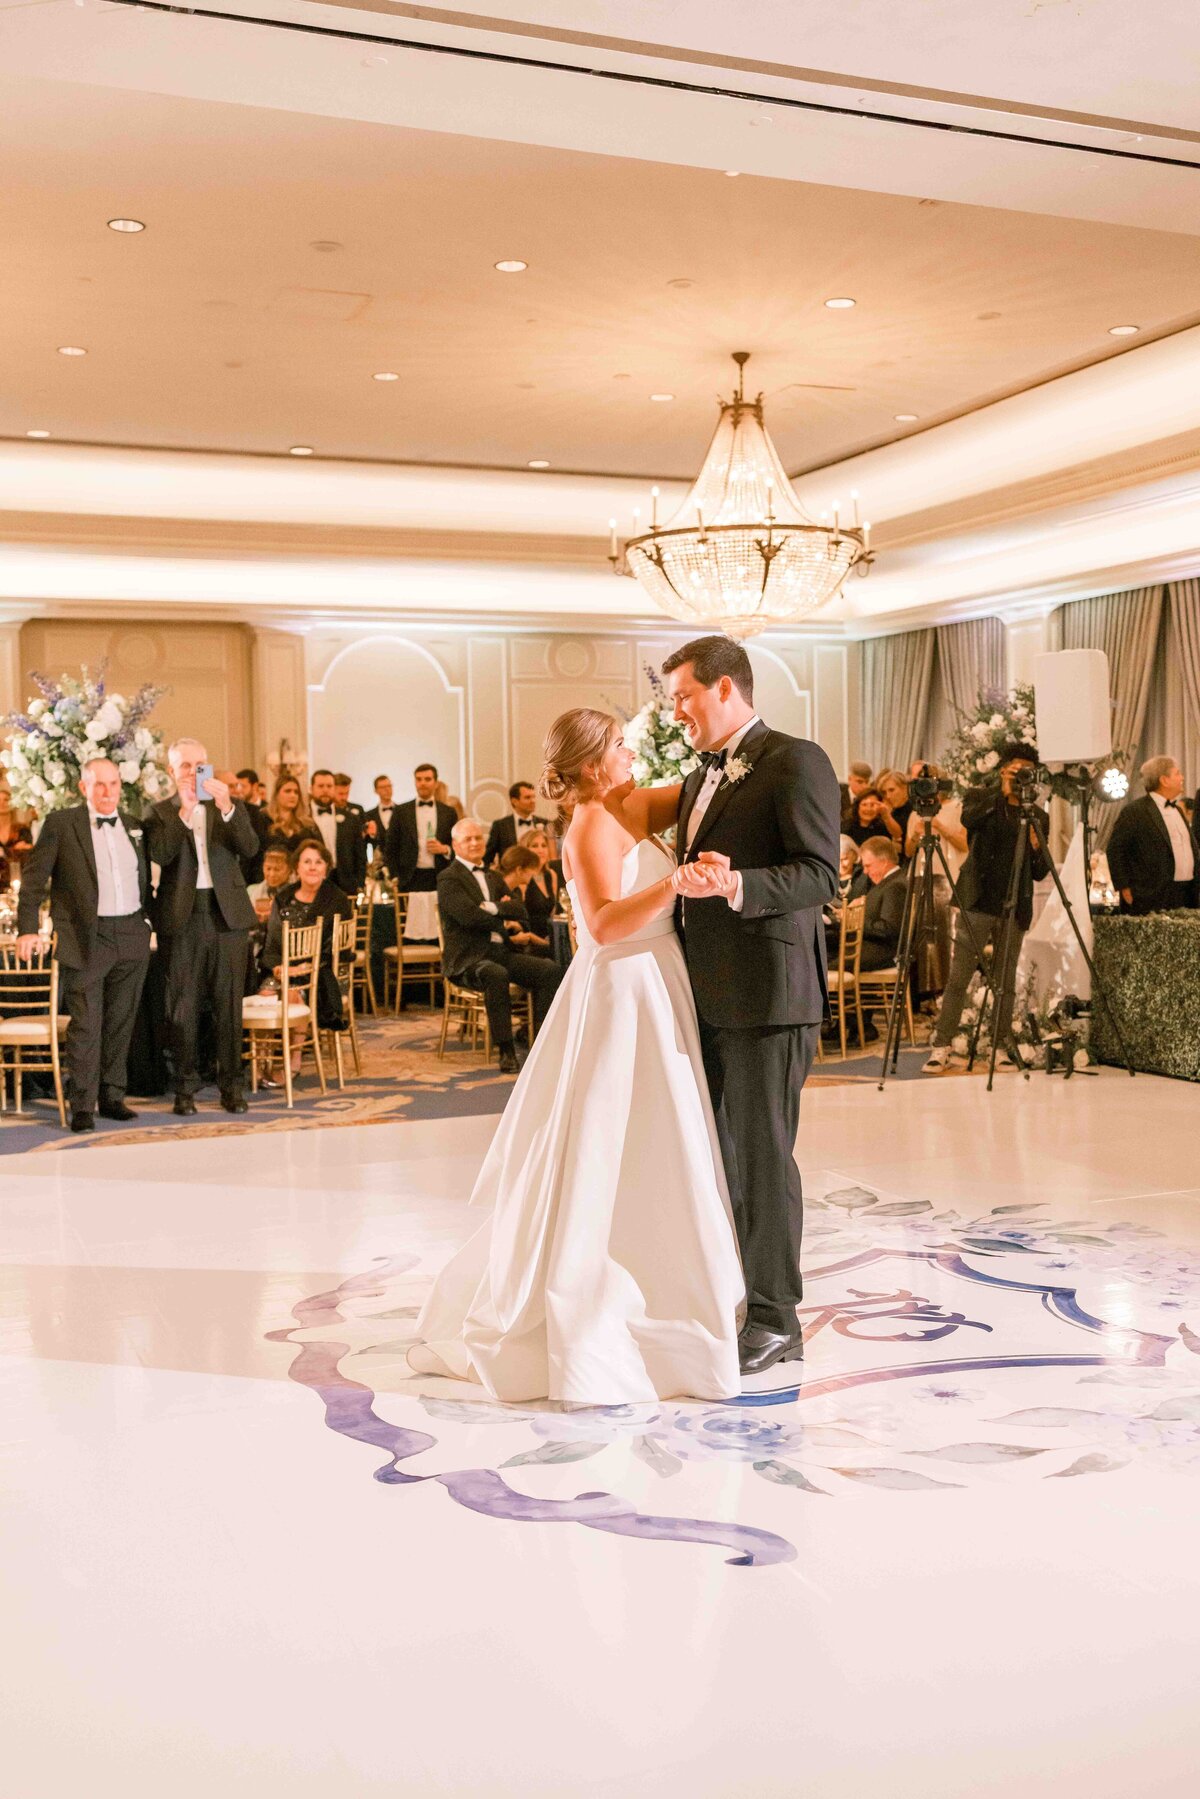 bride and groom share their first dance on the dancefloor at their first wedding reception